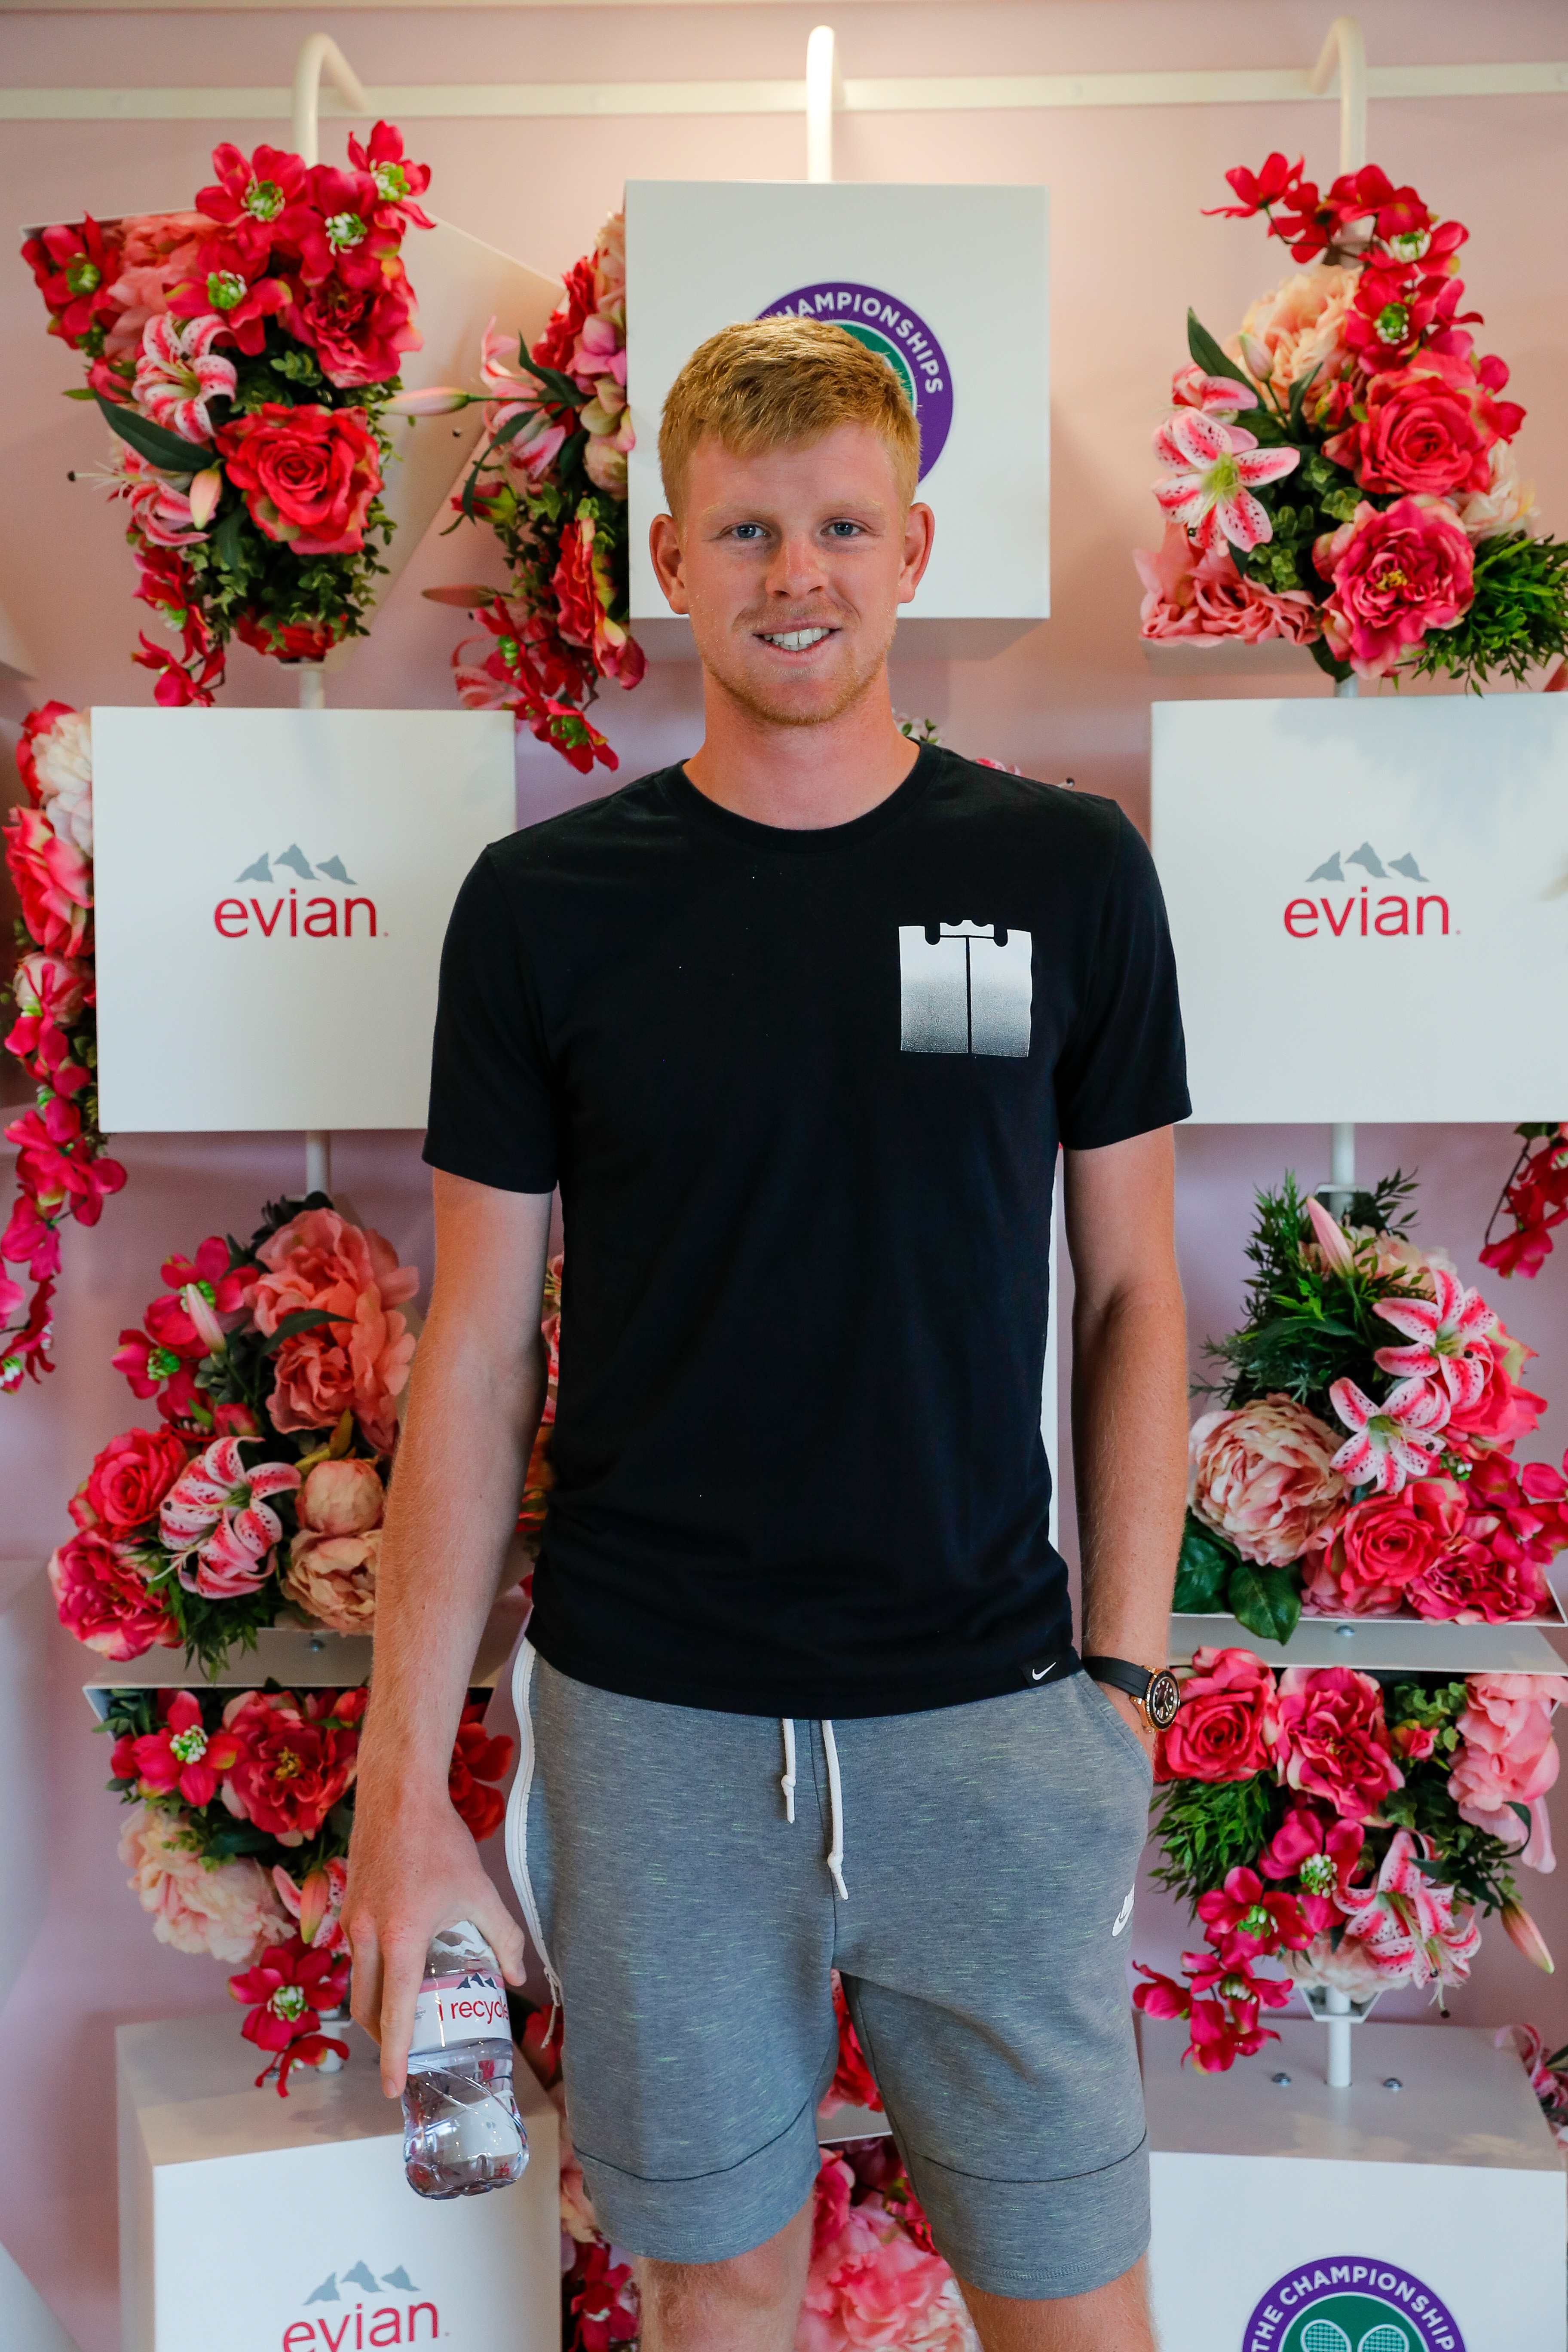 Kyle Edmund is helping evian reward key workers with Wimbledon tickets